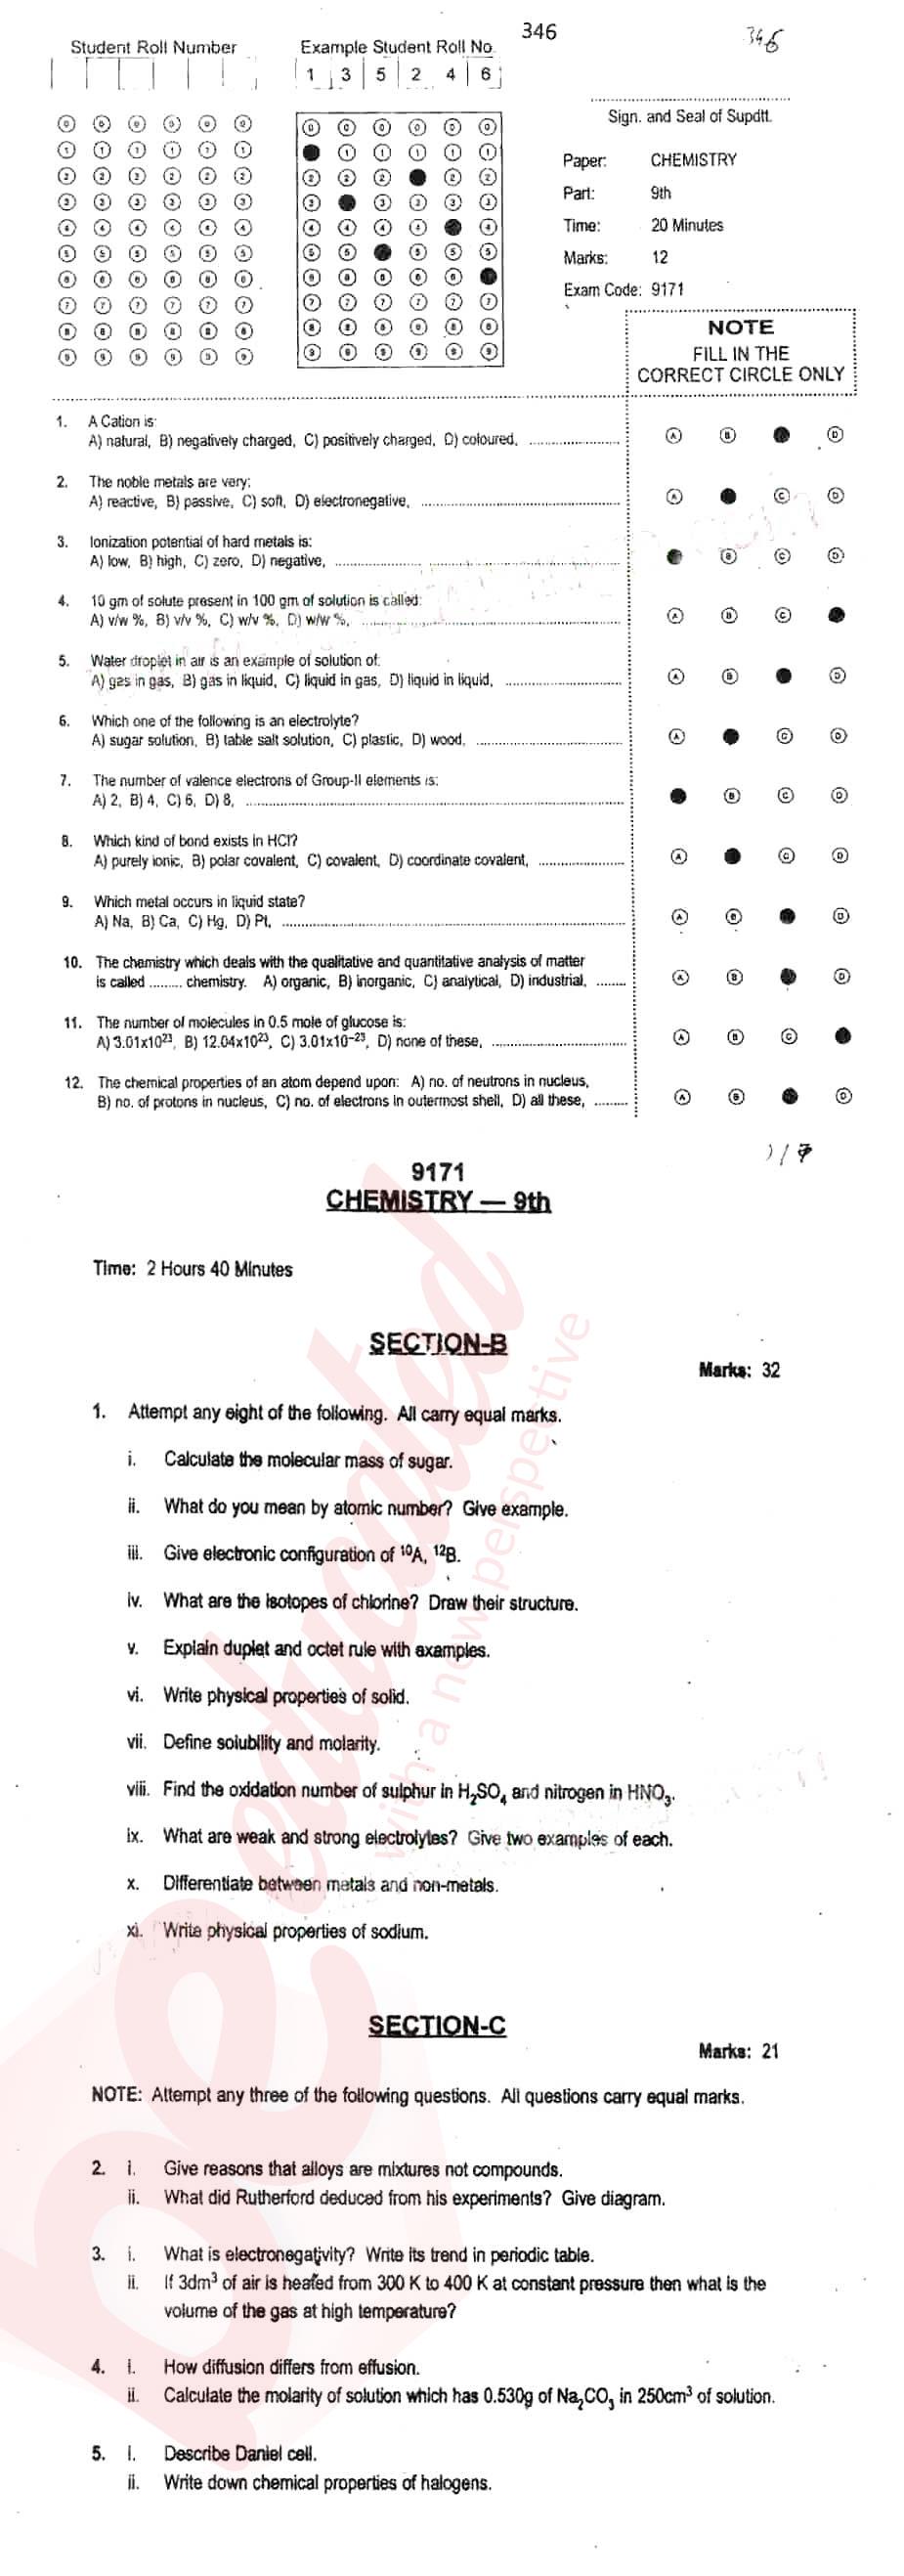 Chemistry 9th English Medium Past Paper Group 1 BISE Abbottabad 2017